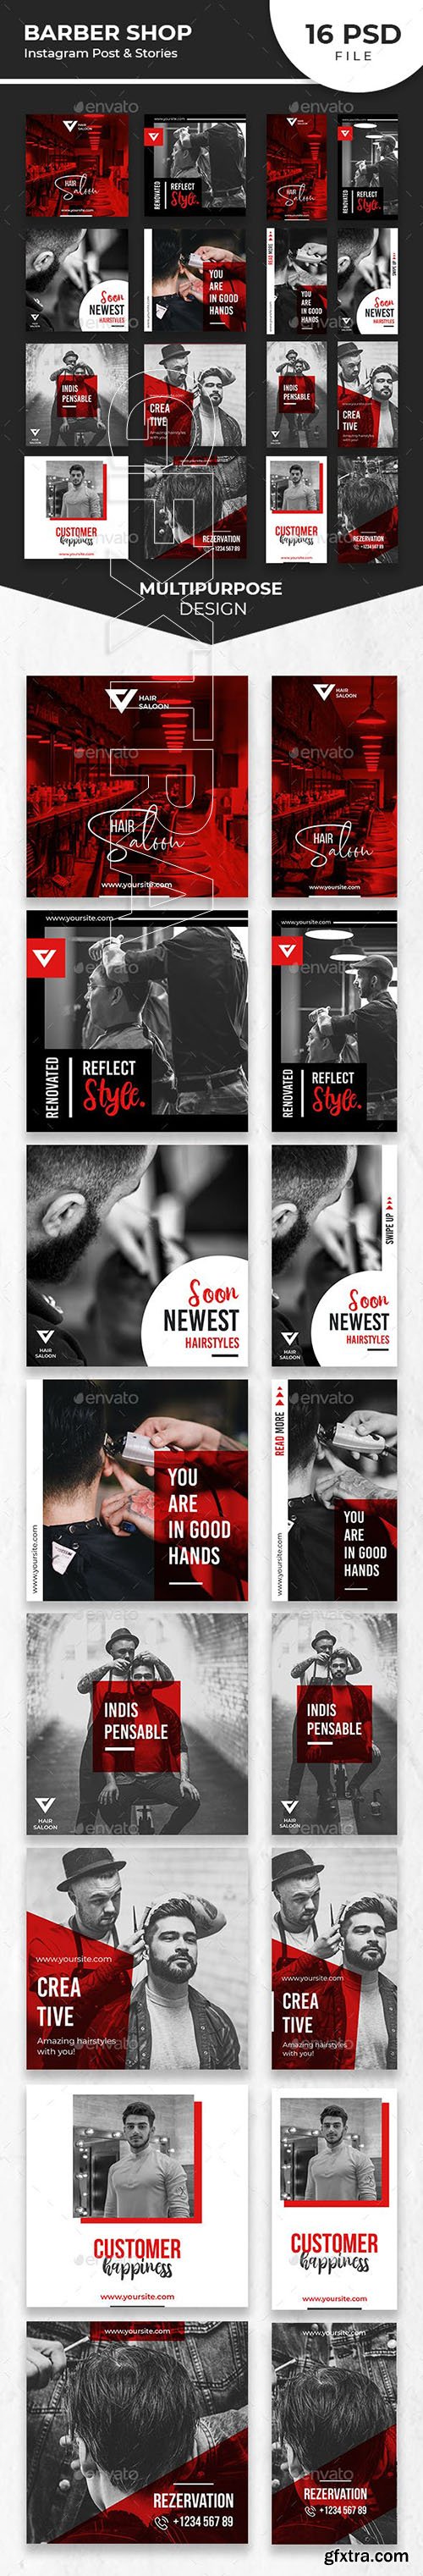 GraphicRiver - Barber Shop Instagram Post and Stories 23331654